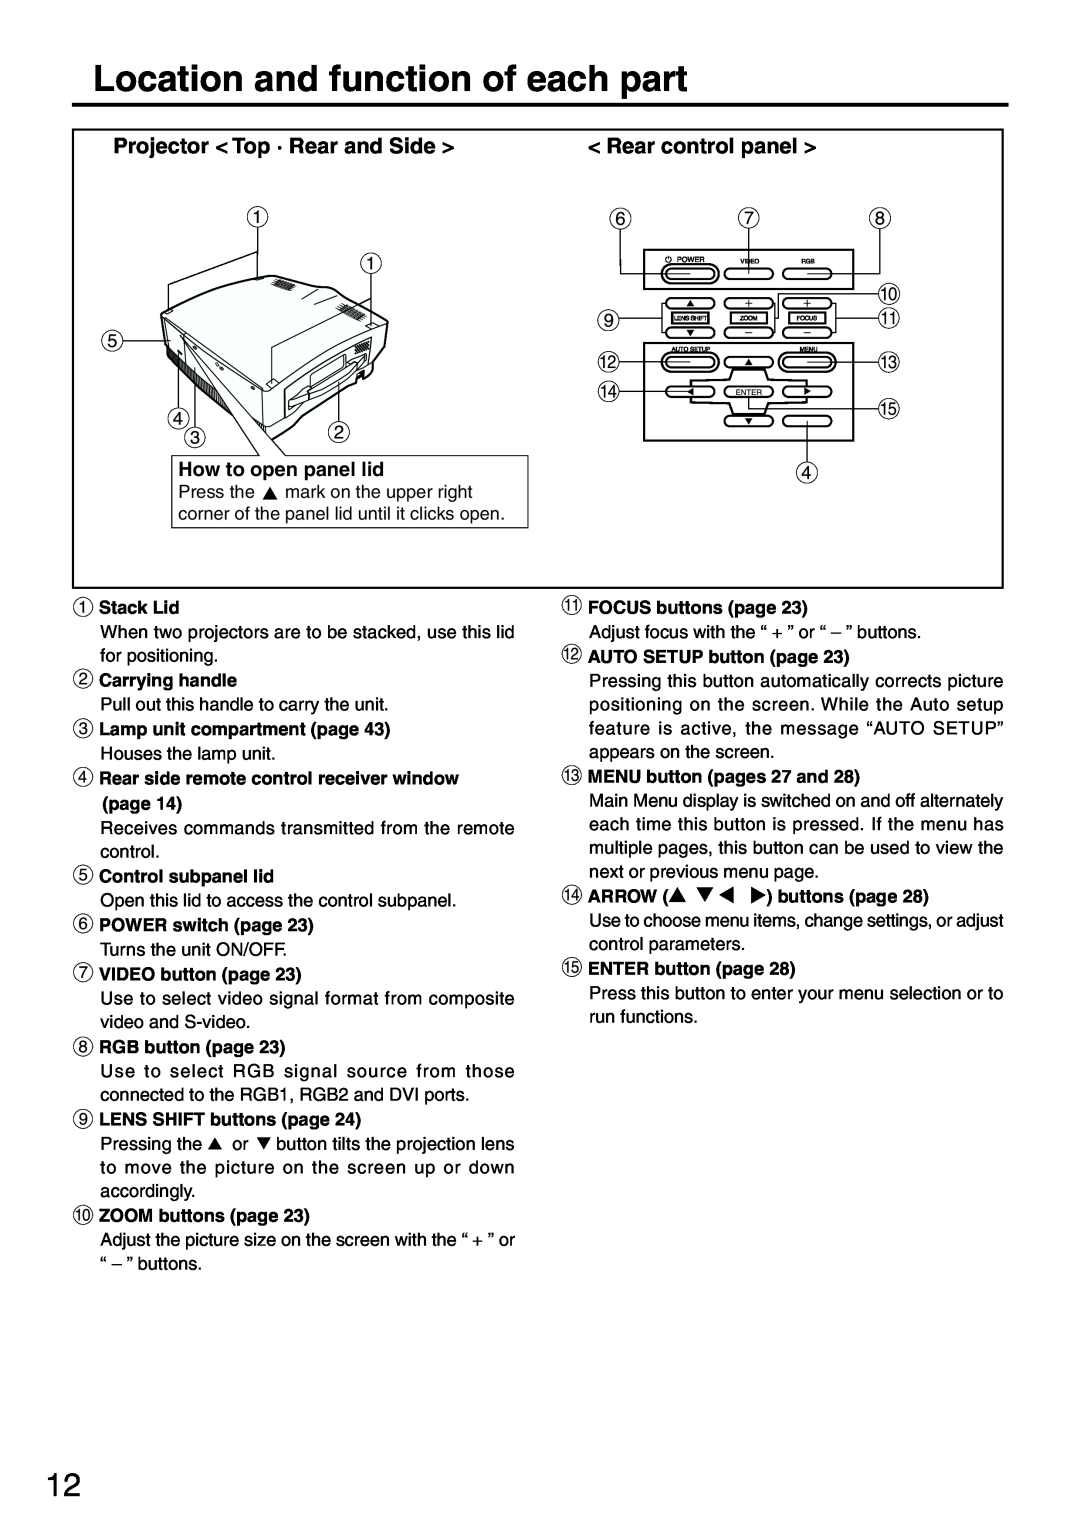 Panasonic PT-L6510U manual Location and function of each part, Projector Top · Rear and Side, Rear control panel 